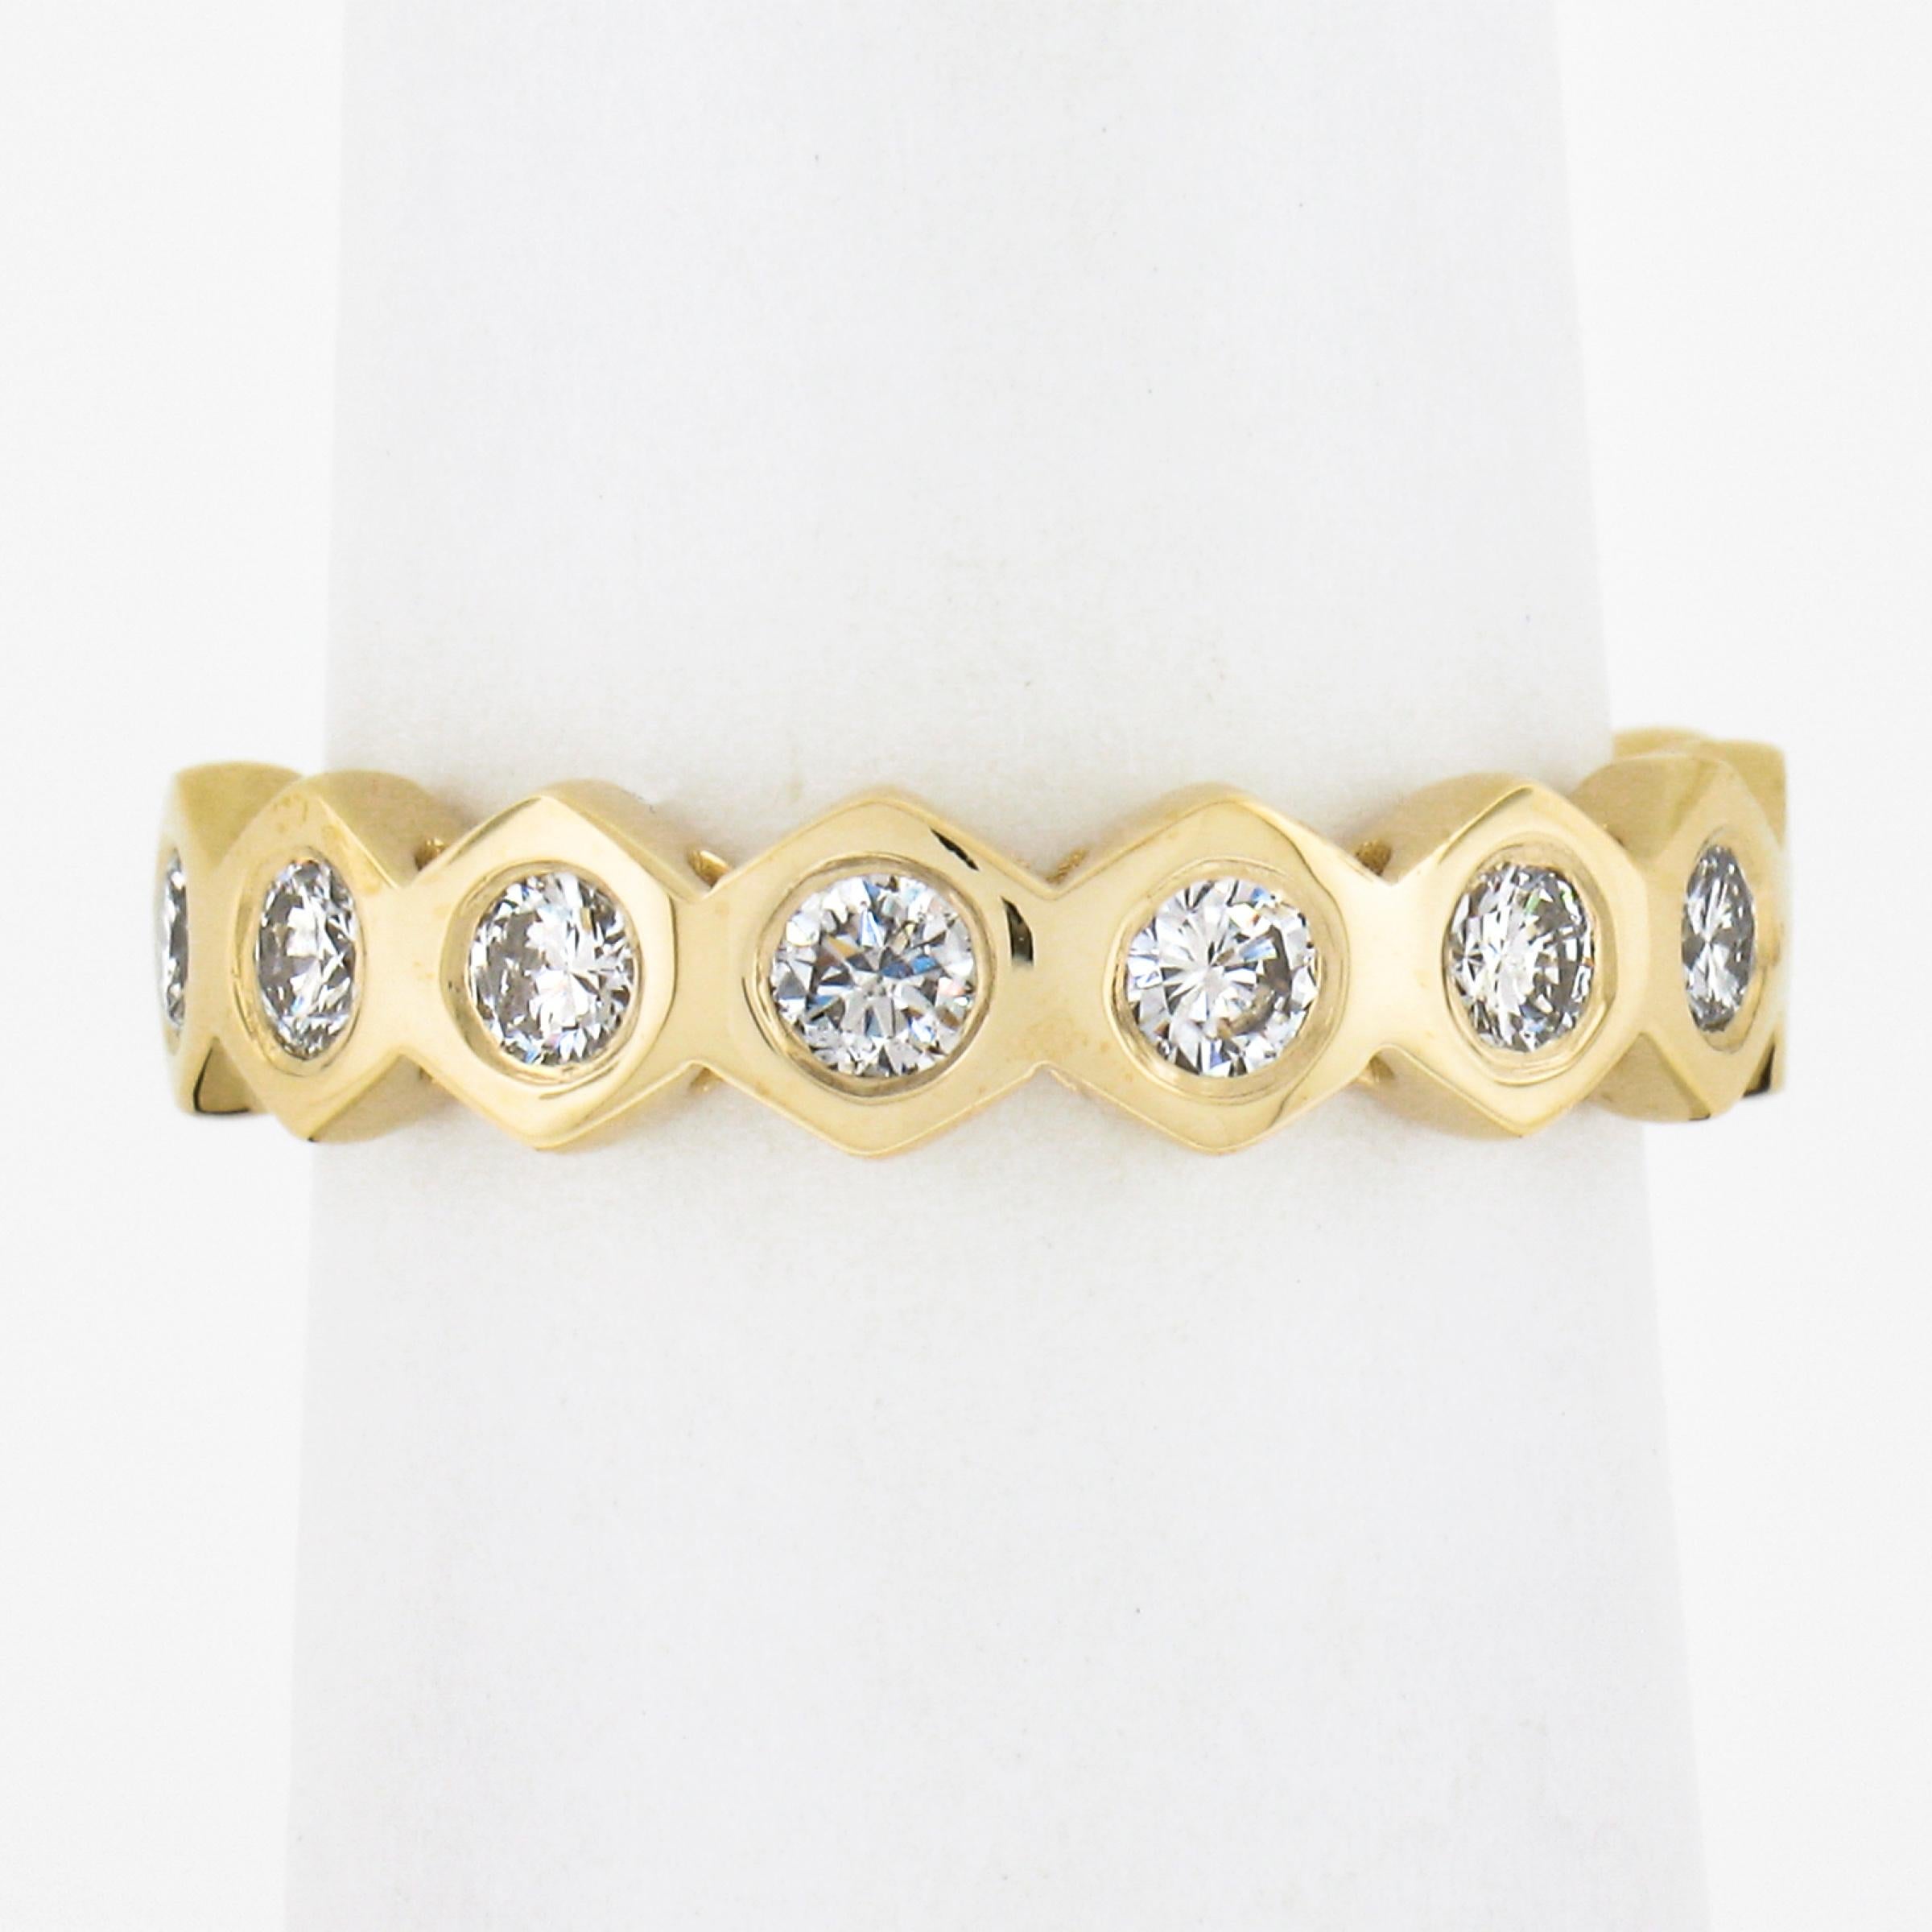 --Stone(s):--
(9) Natural Genuine Diamond - Round Brilliant Cut - Flush Burnish Set - G/H Color - VS1-SI2 Clarity
Total Carat Weight:	0.58 (exact)

Material: Solid 18k Yellow Gold
Weight: 4.09 Grams
Ring Size: 6.0 (Fitted on a finger. We can custom